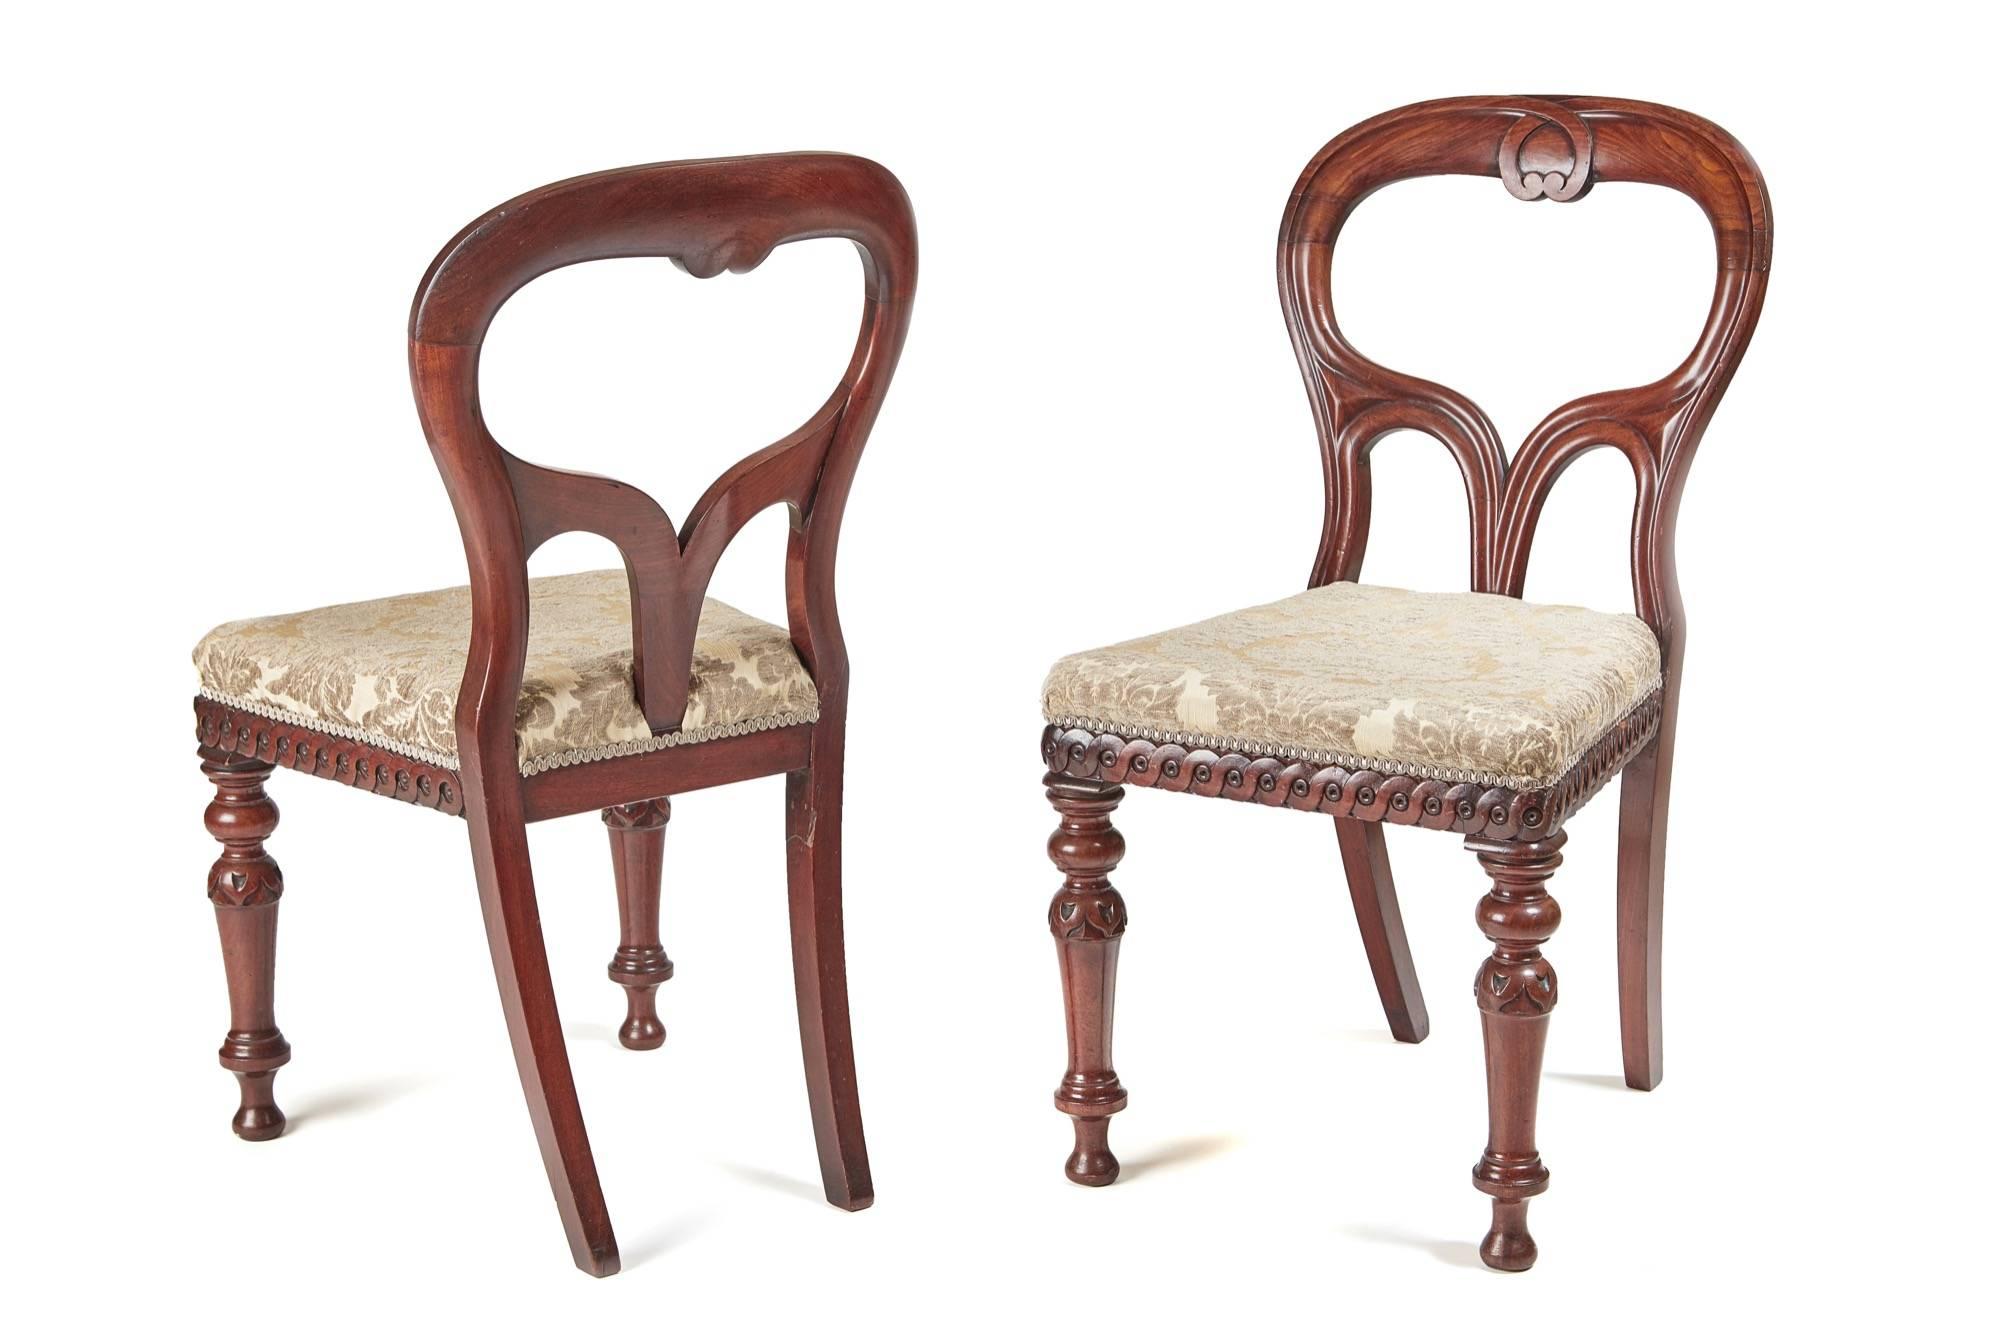 Outstanding quality set of six Victorian Scottish mahogany dining chairs, unusual balloon back with a shaped reeded centre, standing on a carved turned front legs outswept back legs, nice quality carving around the seats, newly re-upholstery in a